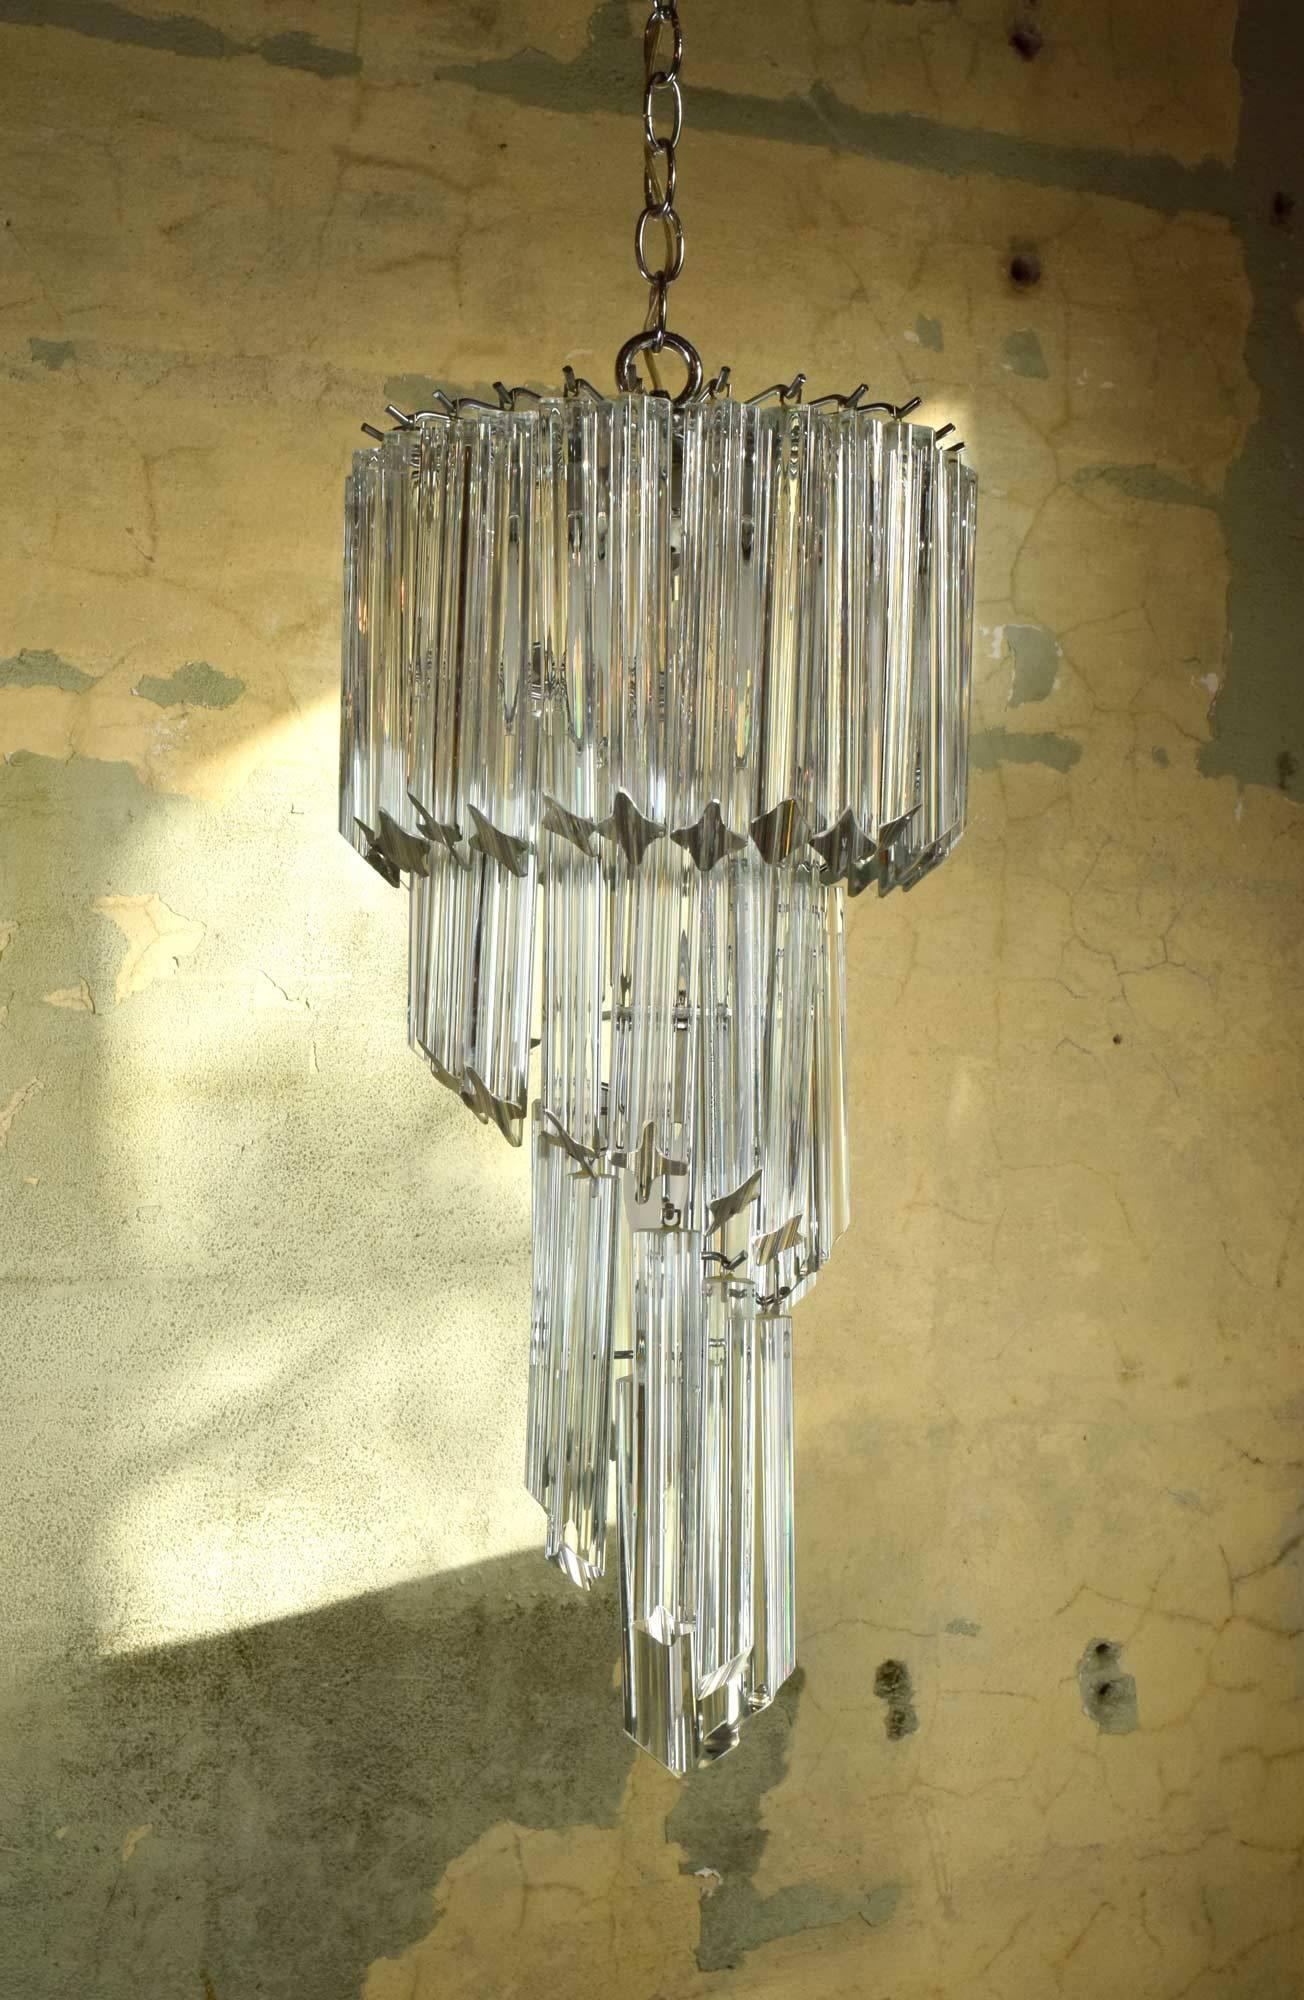 Fifty heavy Murano glass crystals spiral downwards on this stunning chandelier from esteemed manufacturer, Venini.

circa 1960
Condition: Excellent
Finish: Original
Country of origin: USA
Four candelabra sockets

Measurements: 12